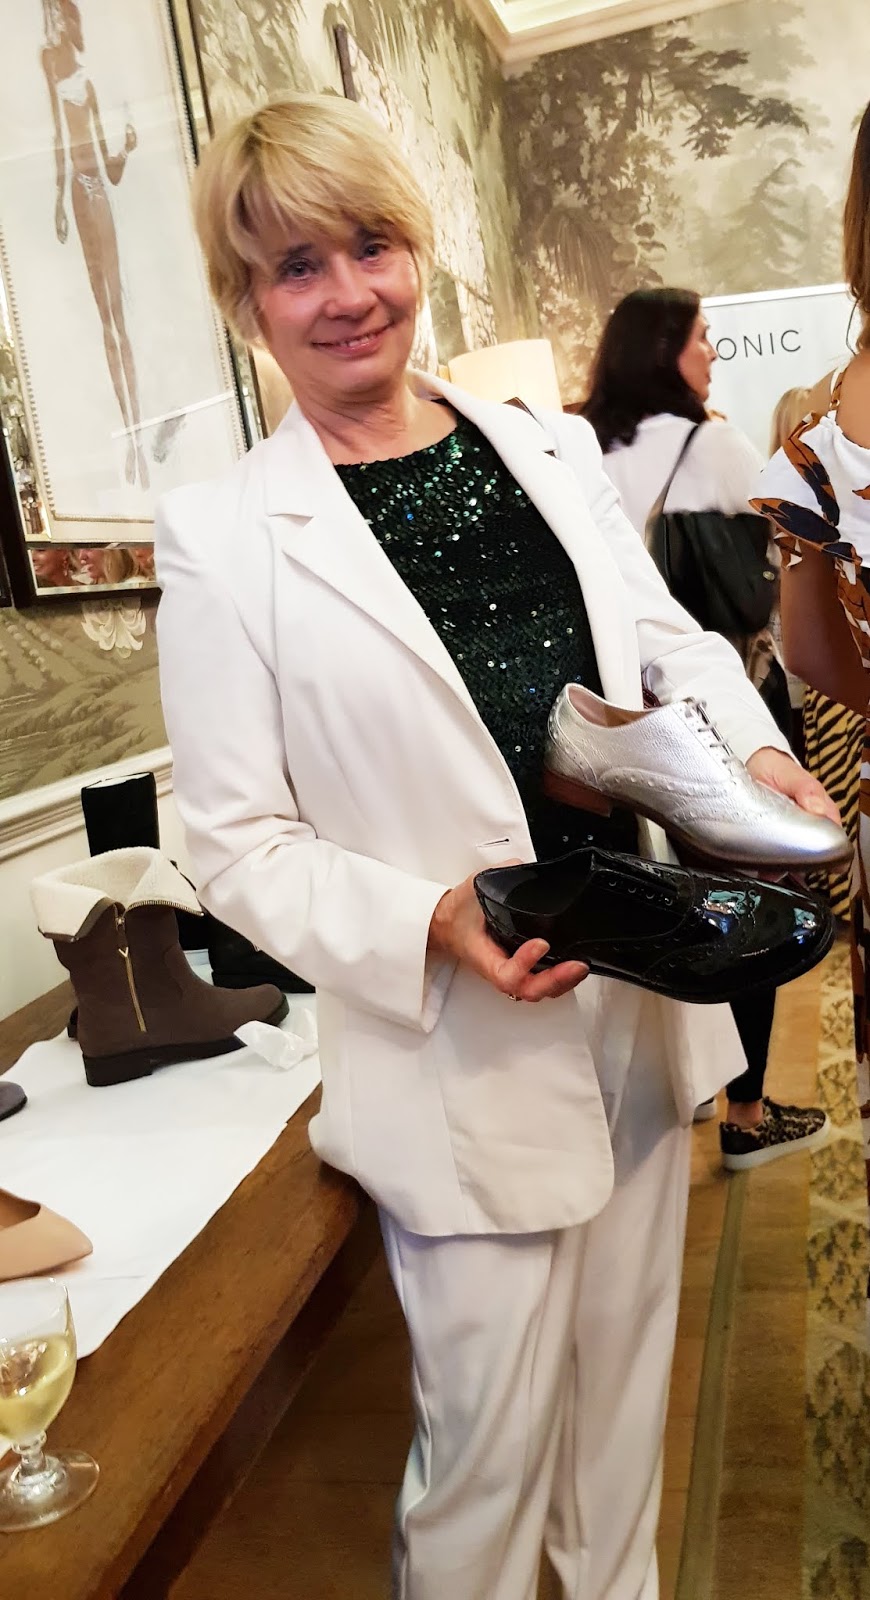 Style blogger Gail Hanlon from Is This Mutton? at the Vionic UK runway show in London